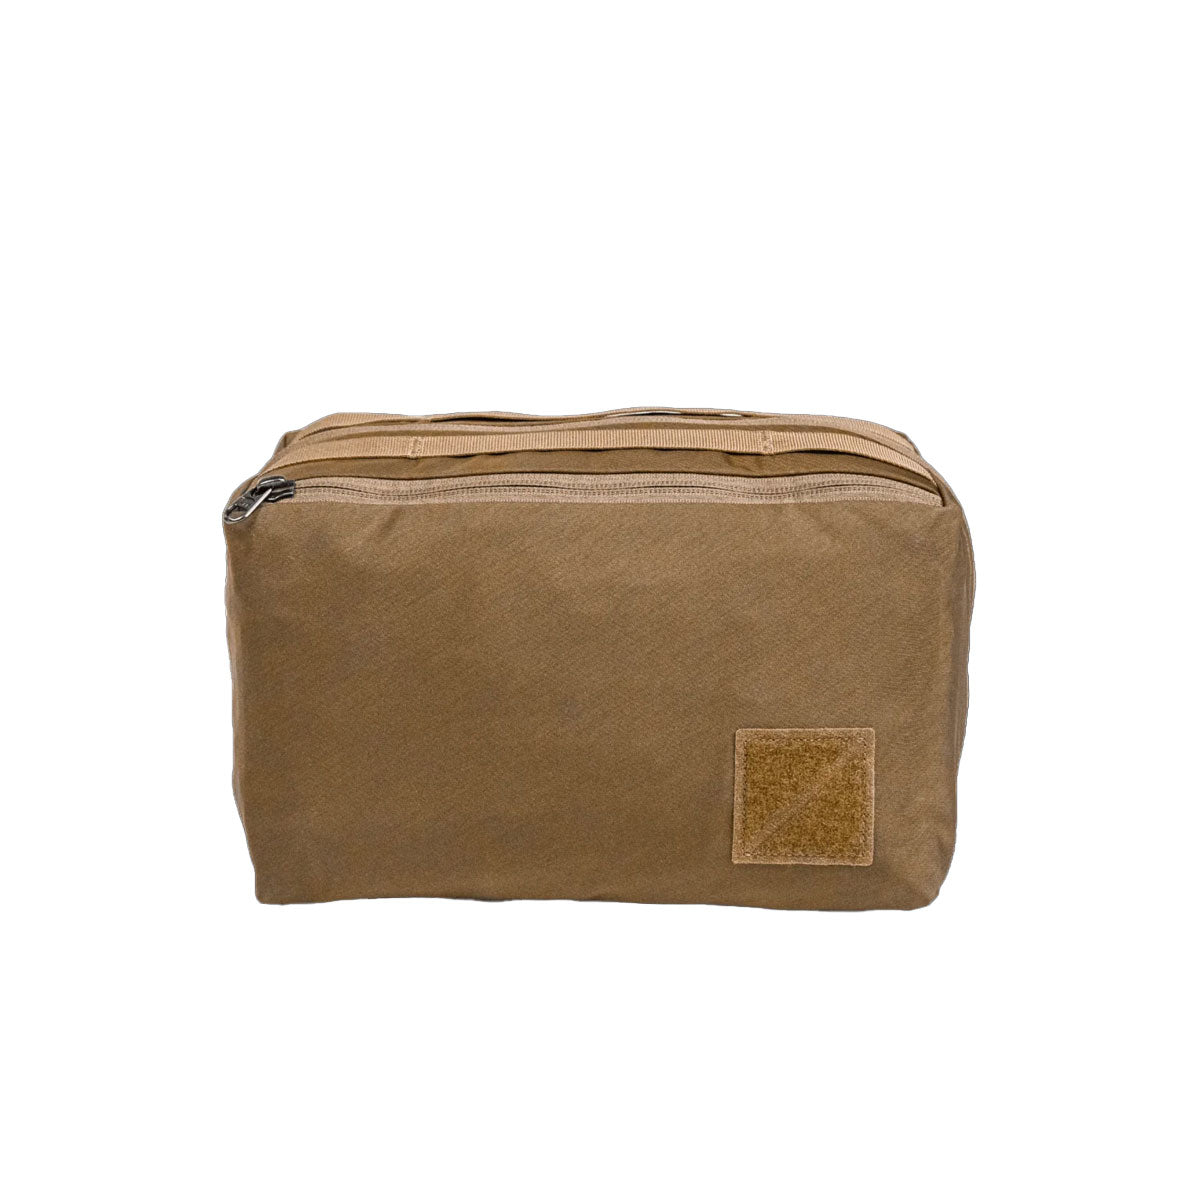 [PO] EVERGOODS : Transit Packing Cube 8L : Coyote Brown